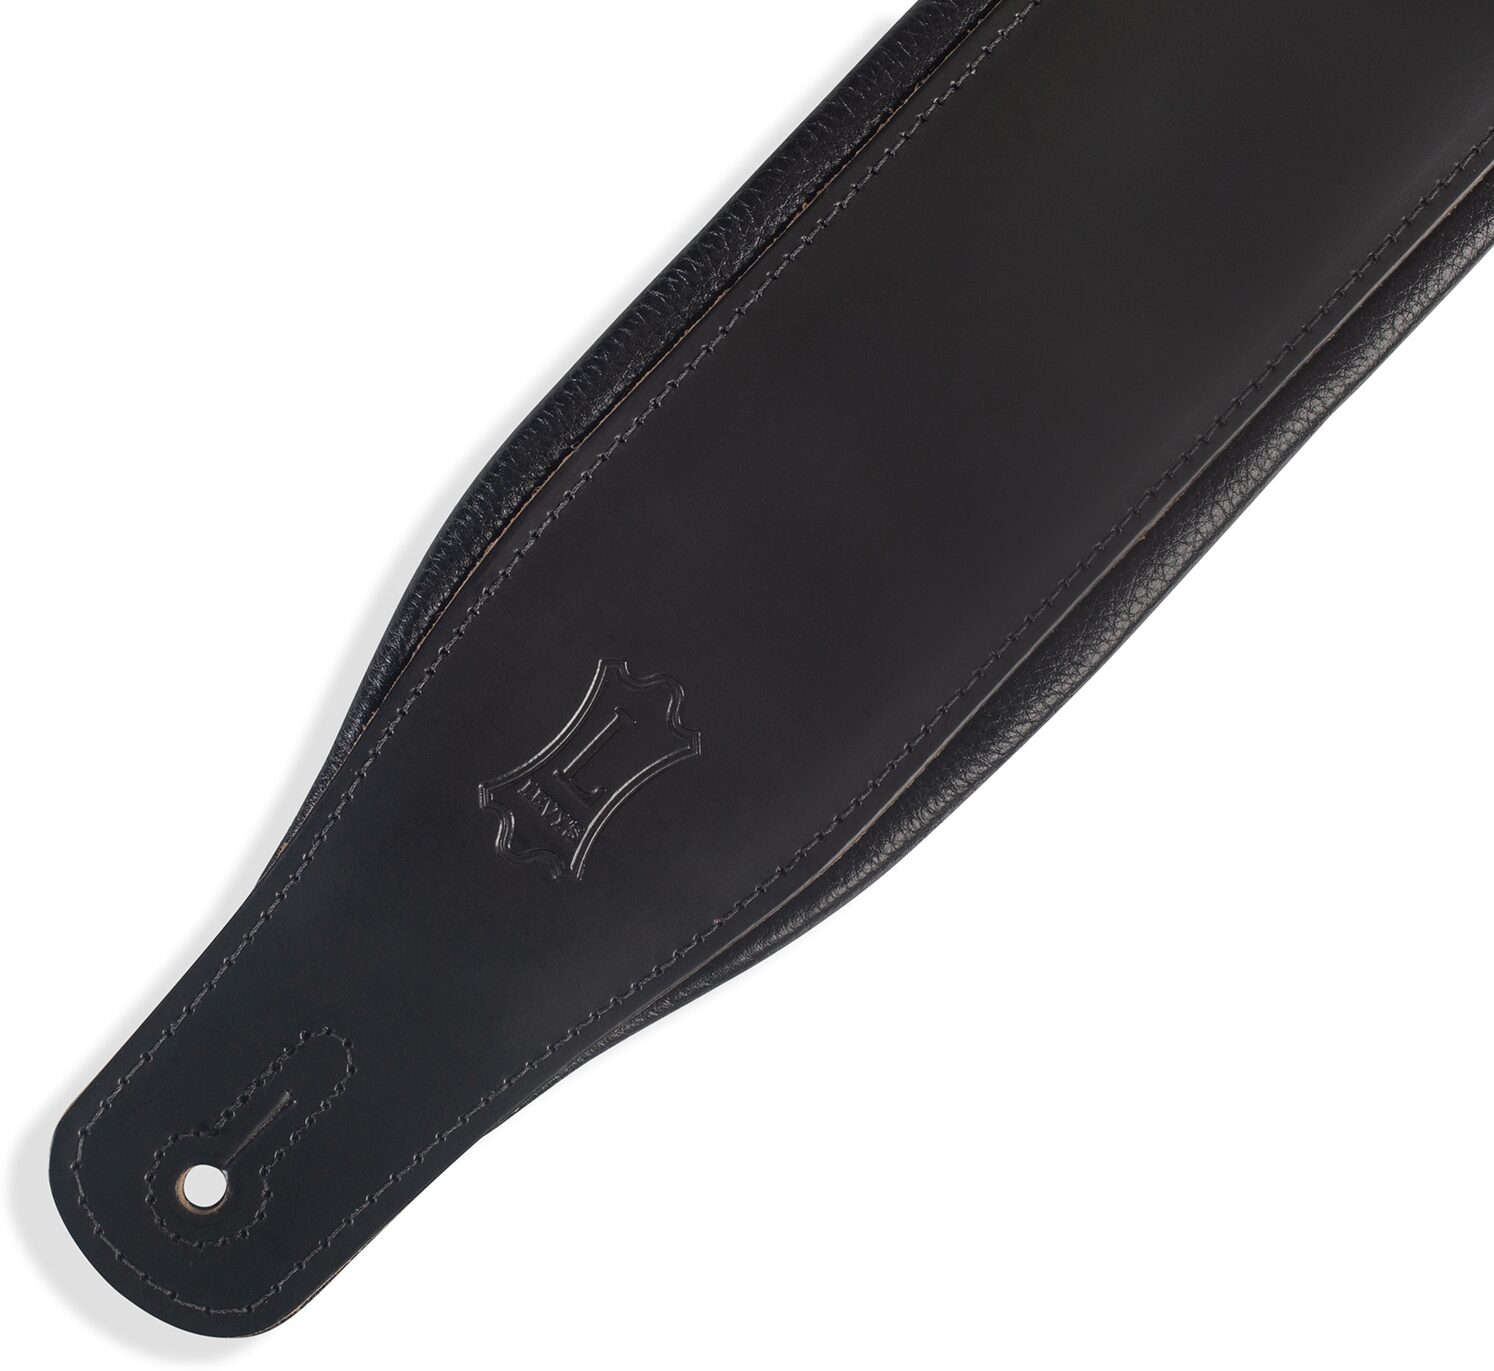 Levy's Leather Padded Guitar Strap | zZounds